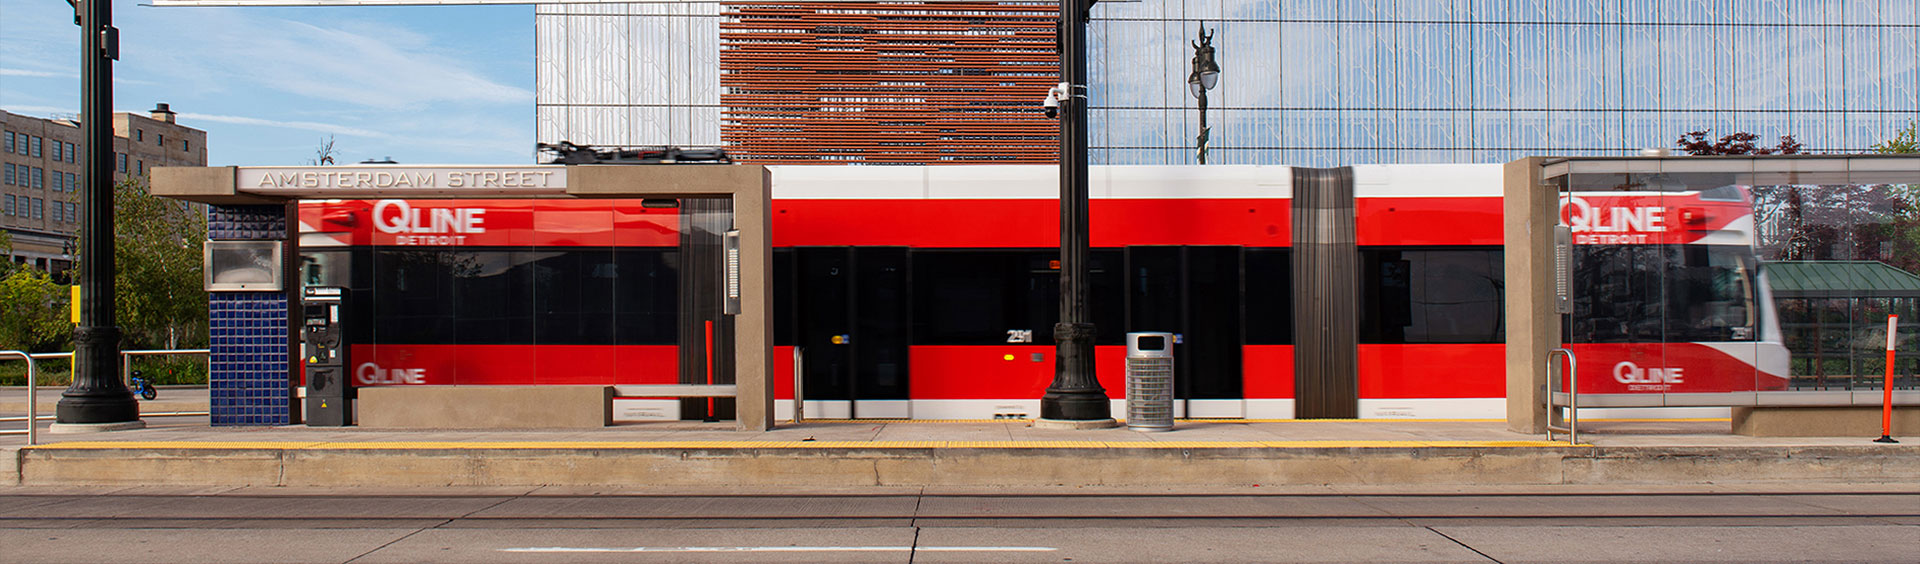 QLINE Detroit - What's On the line